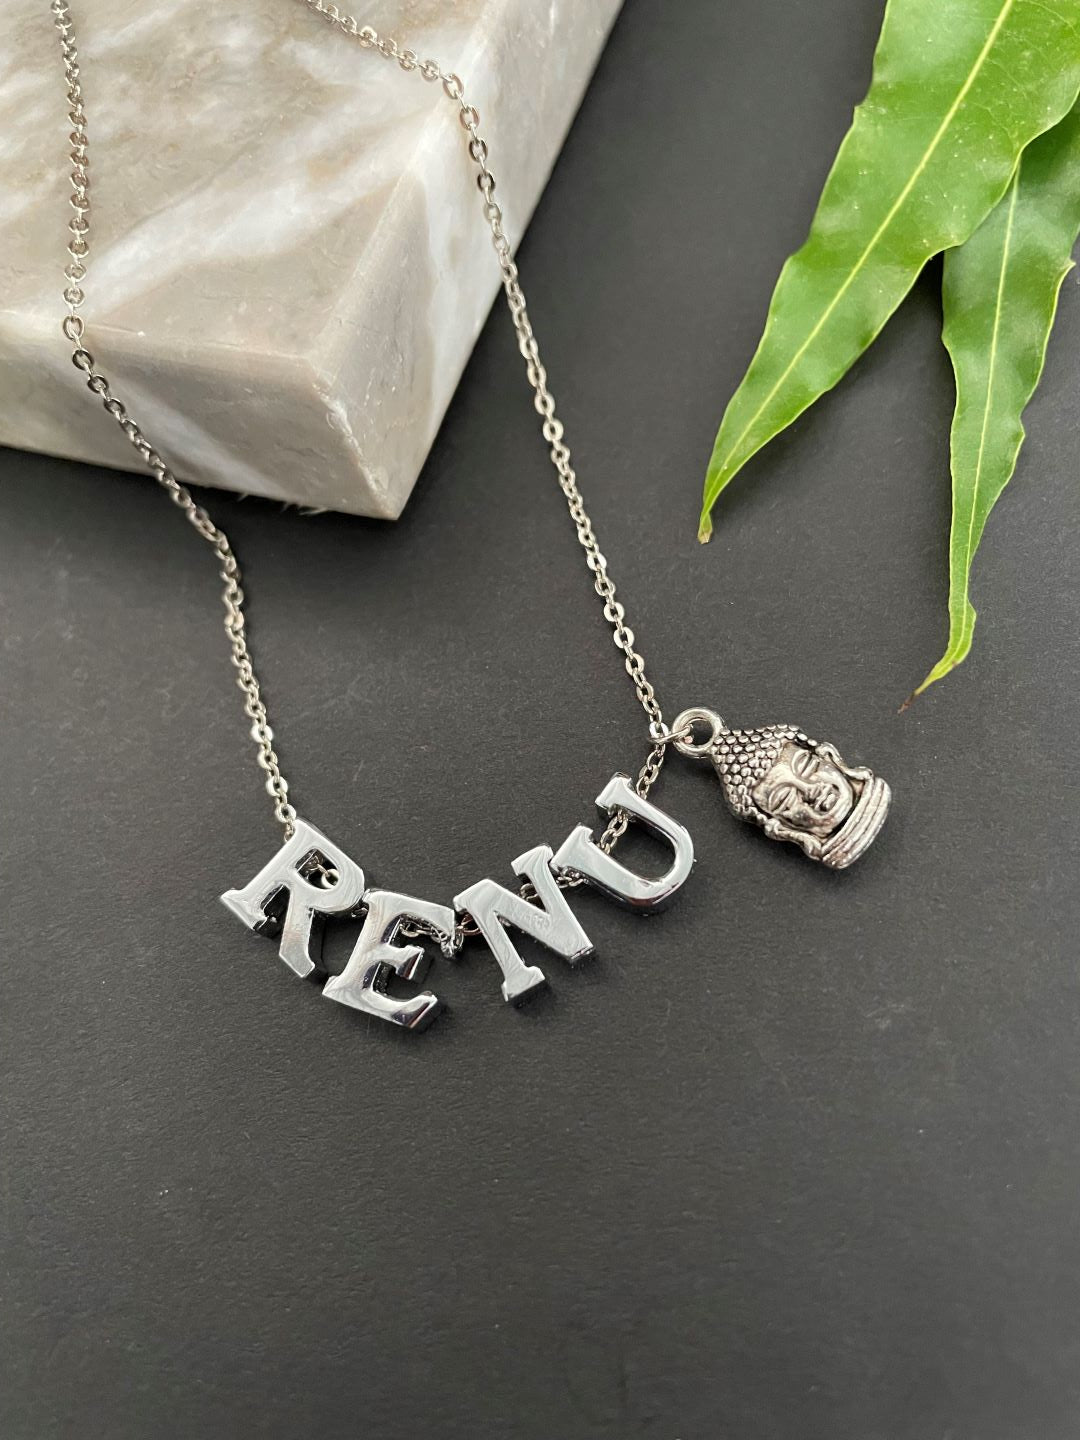 Silver-Plated Custom Name Necklace With A Buddha Charm – Digital